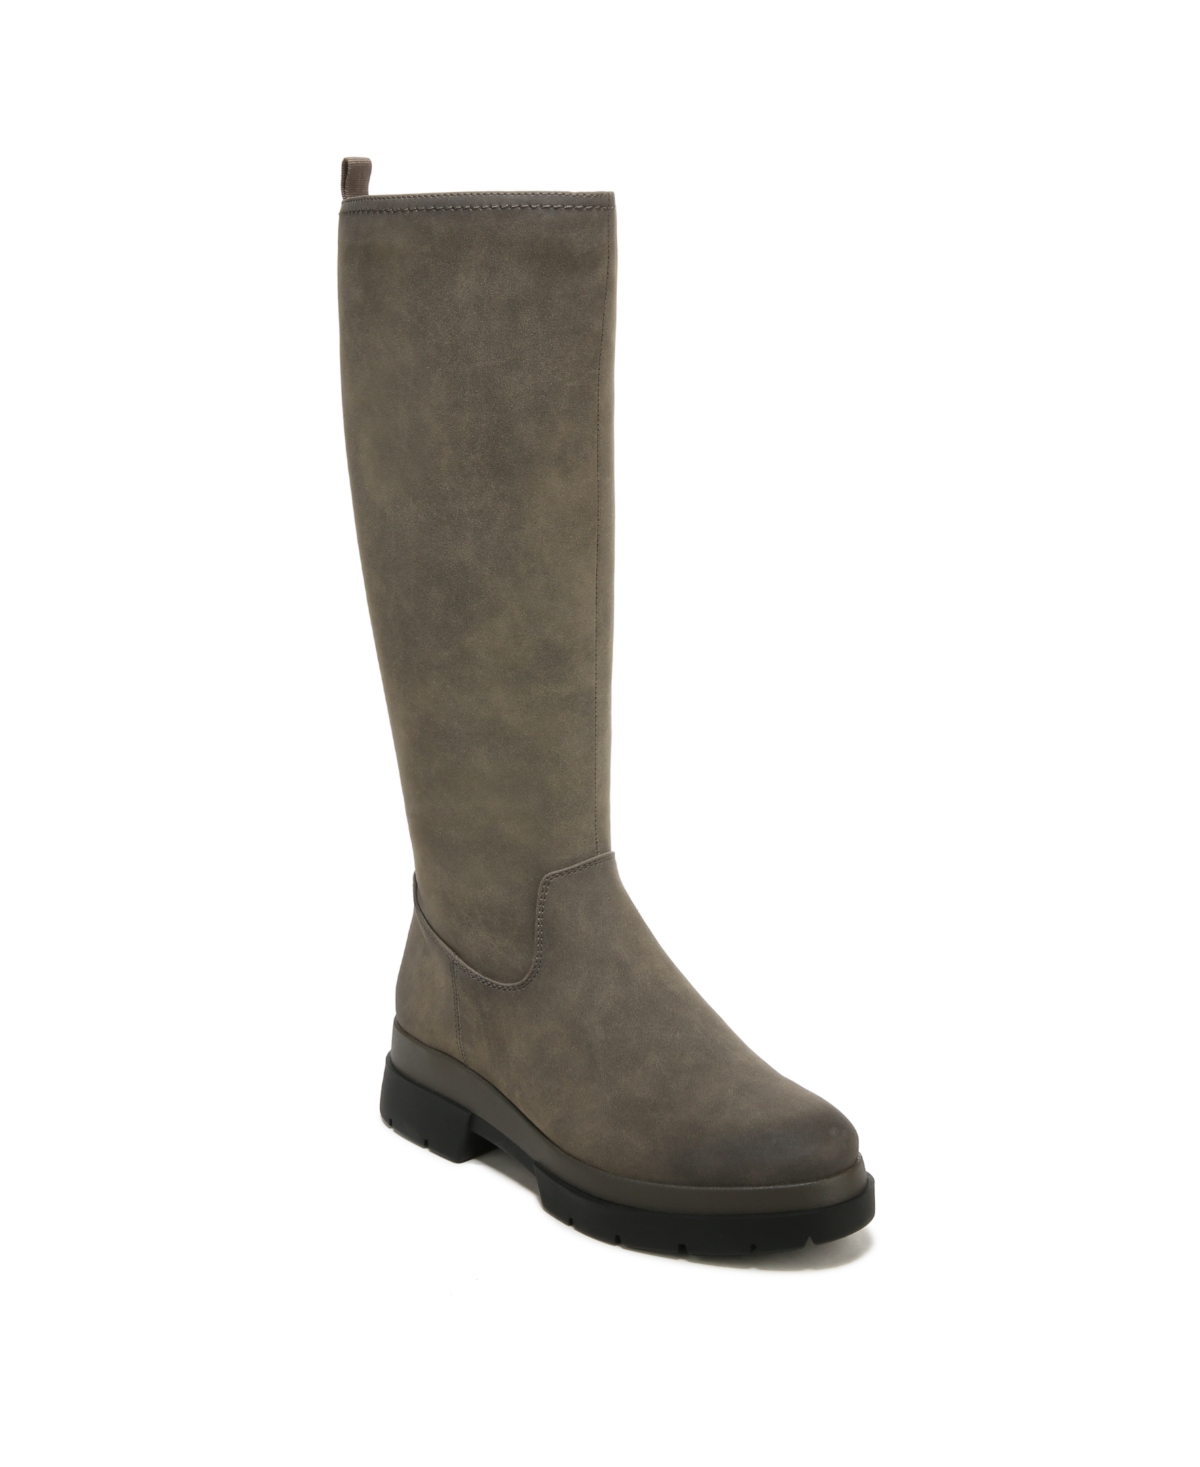 Orchid High Shaft Boots - Dark Olive Faux Nubuck